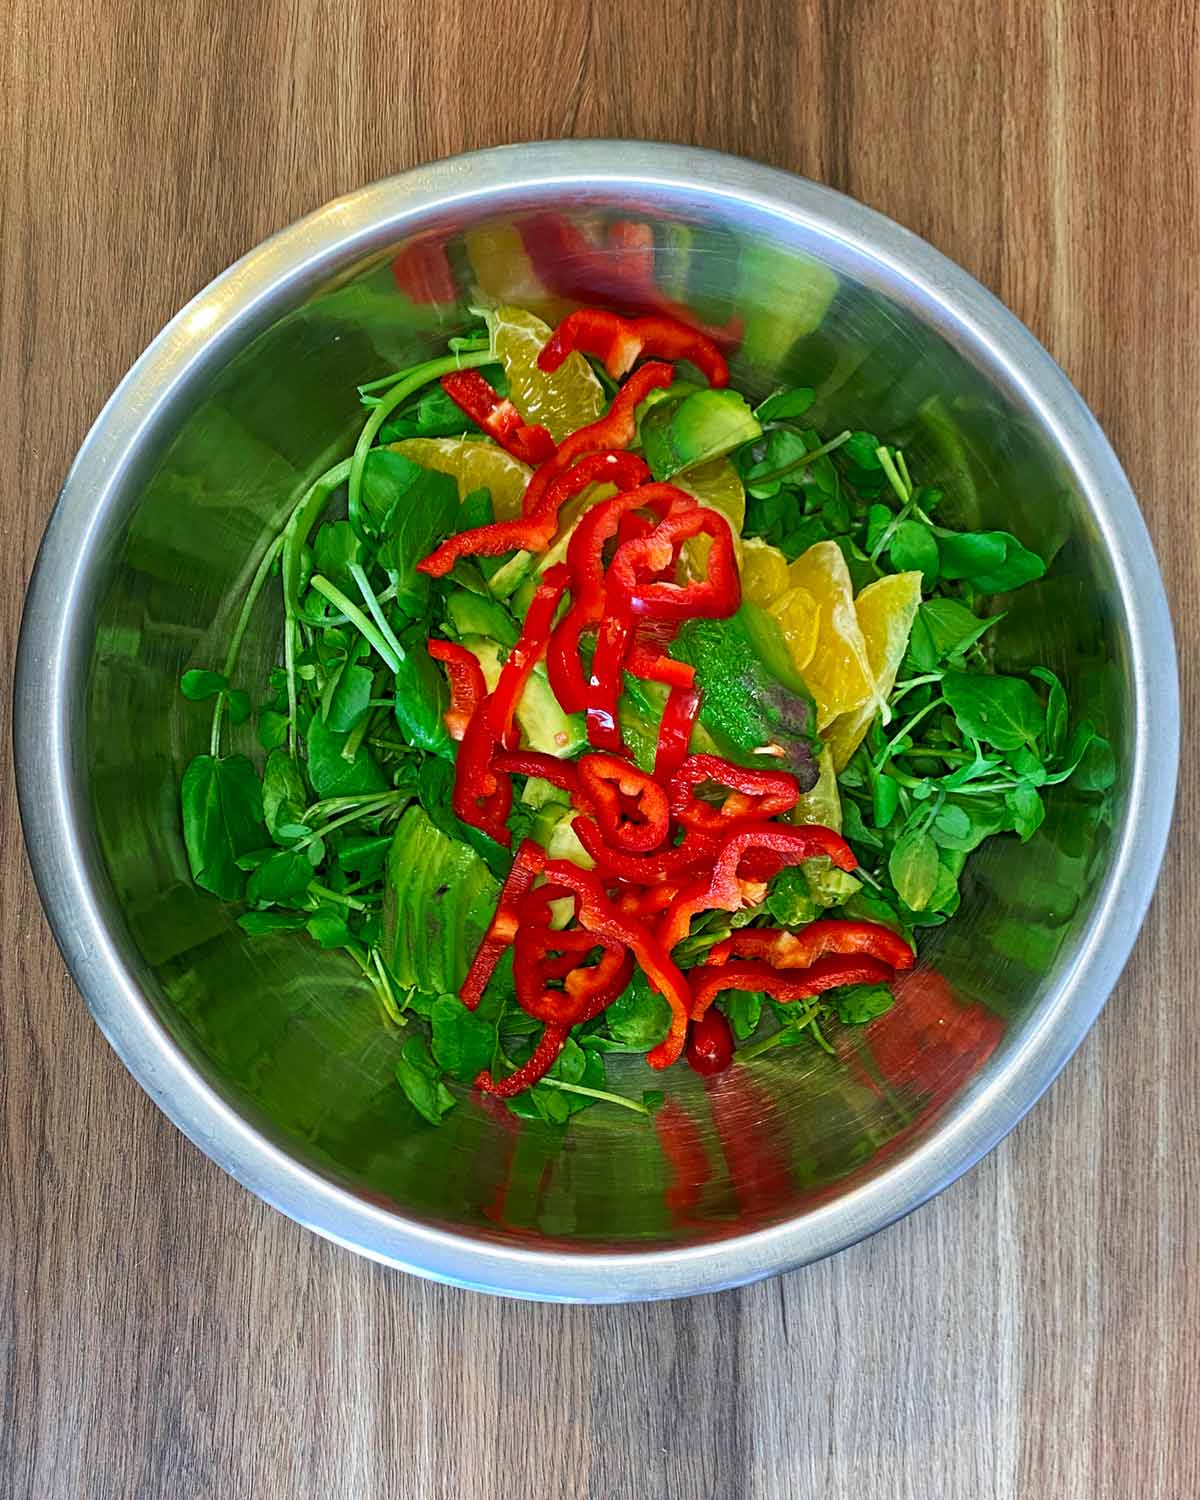 Watercress, sliced avocado, sliced orange and sliced red pepper in a large bowl.